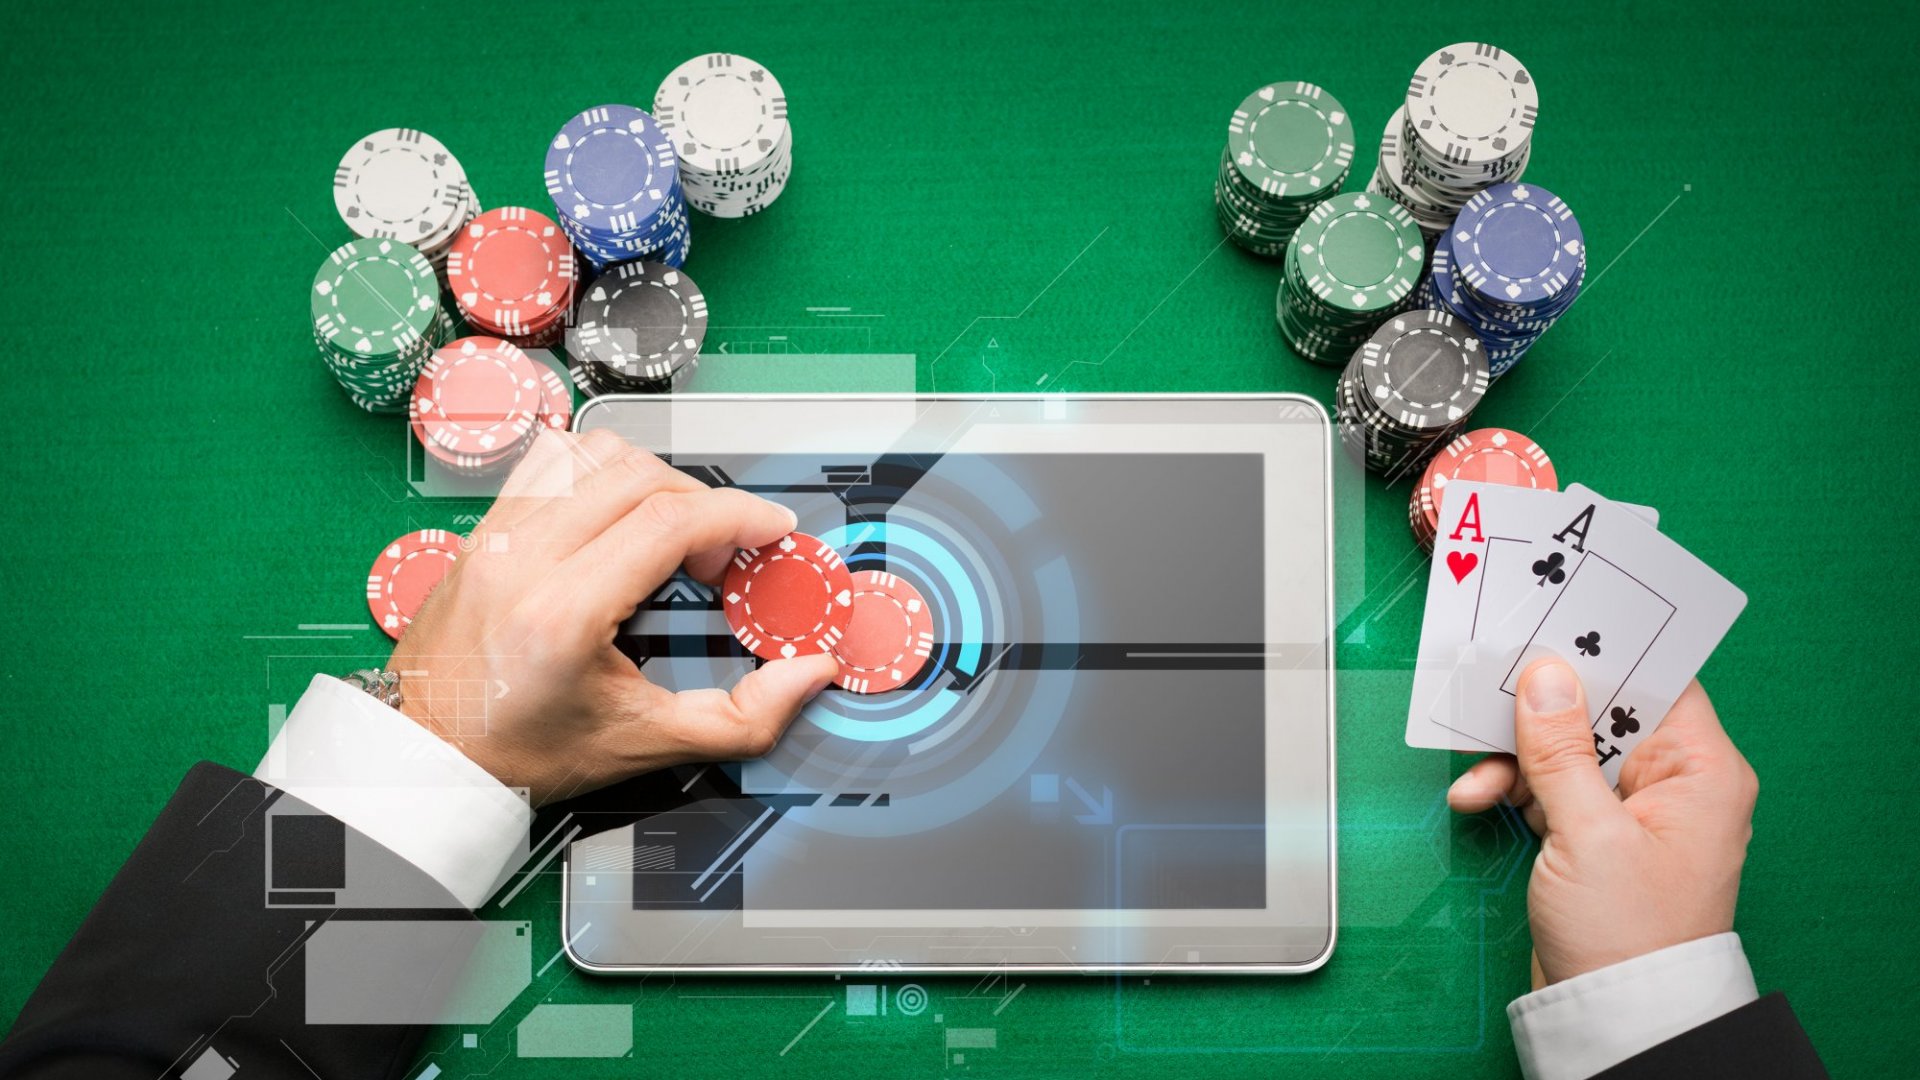 Top 5 SEO Tips for Online Casinos